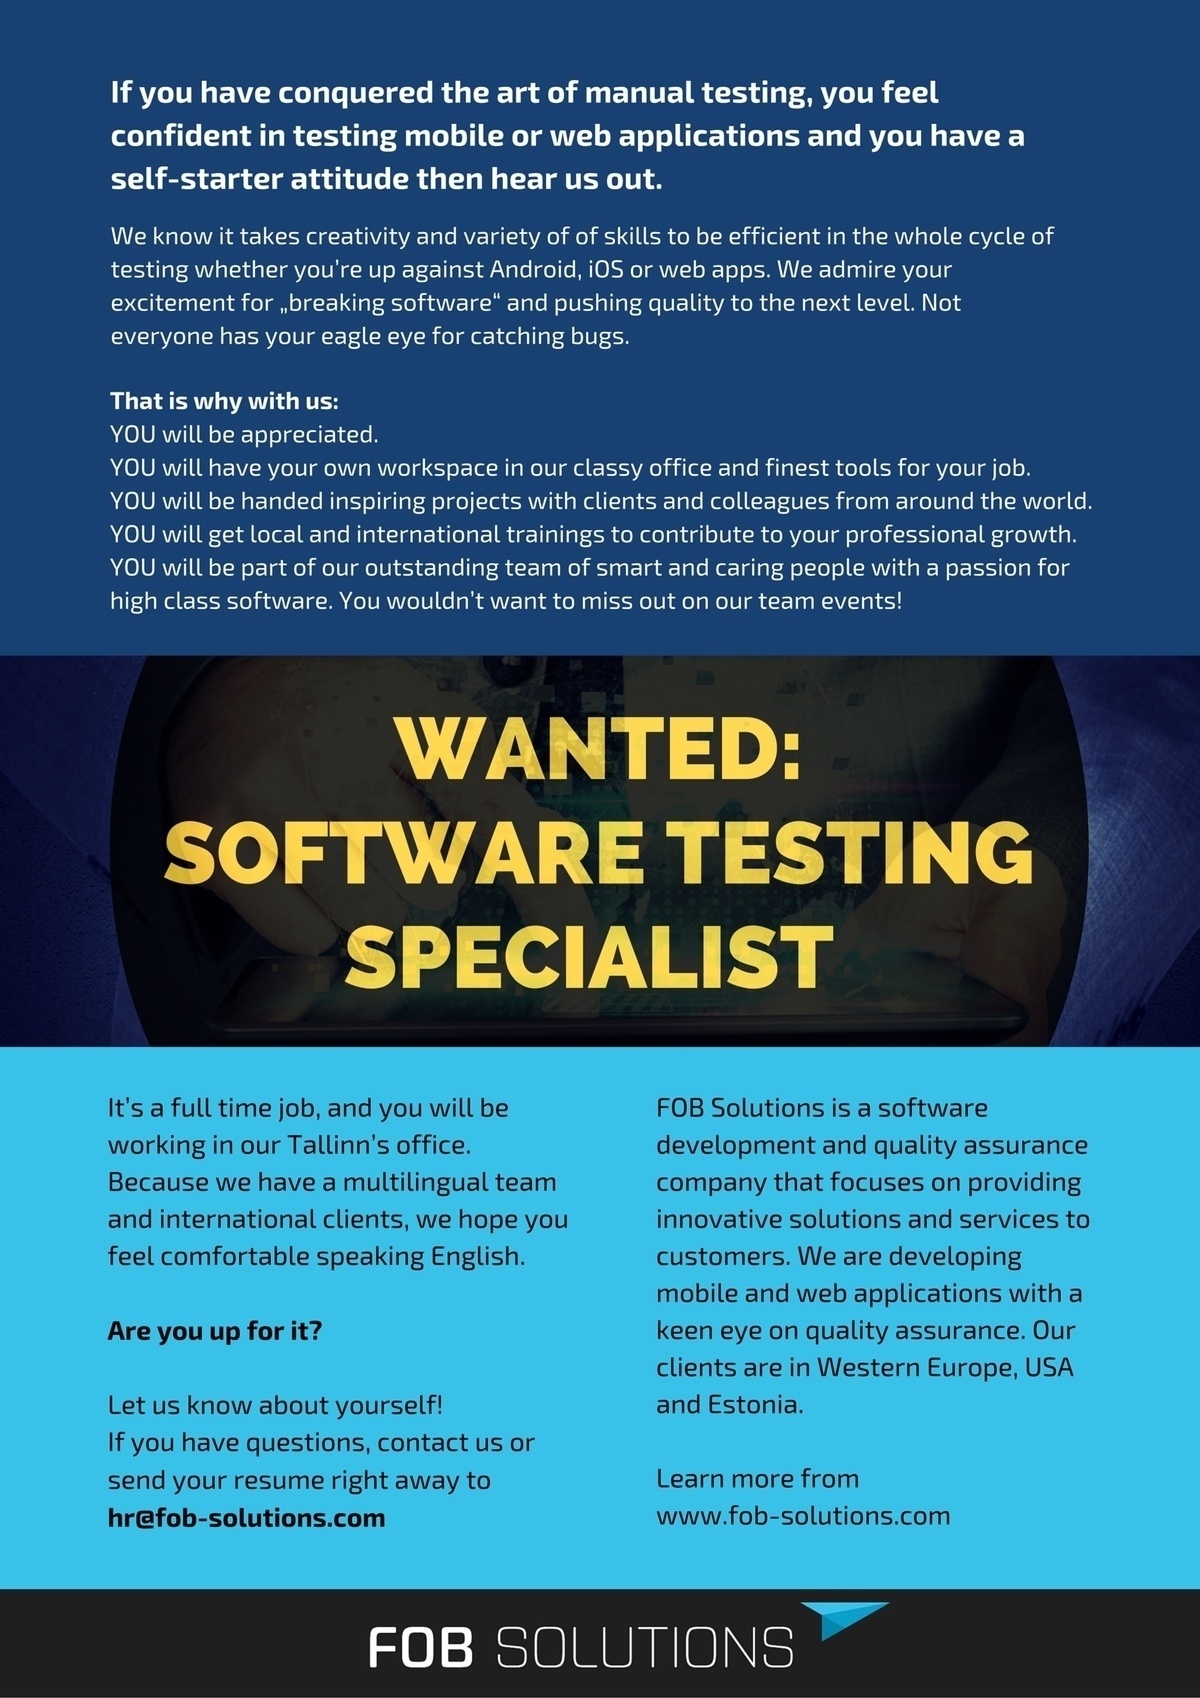 FOB Solutions OÜ Software testing specialist 